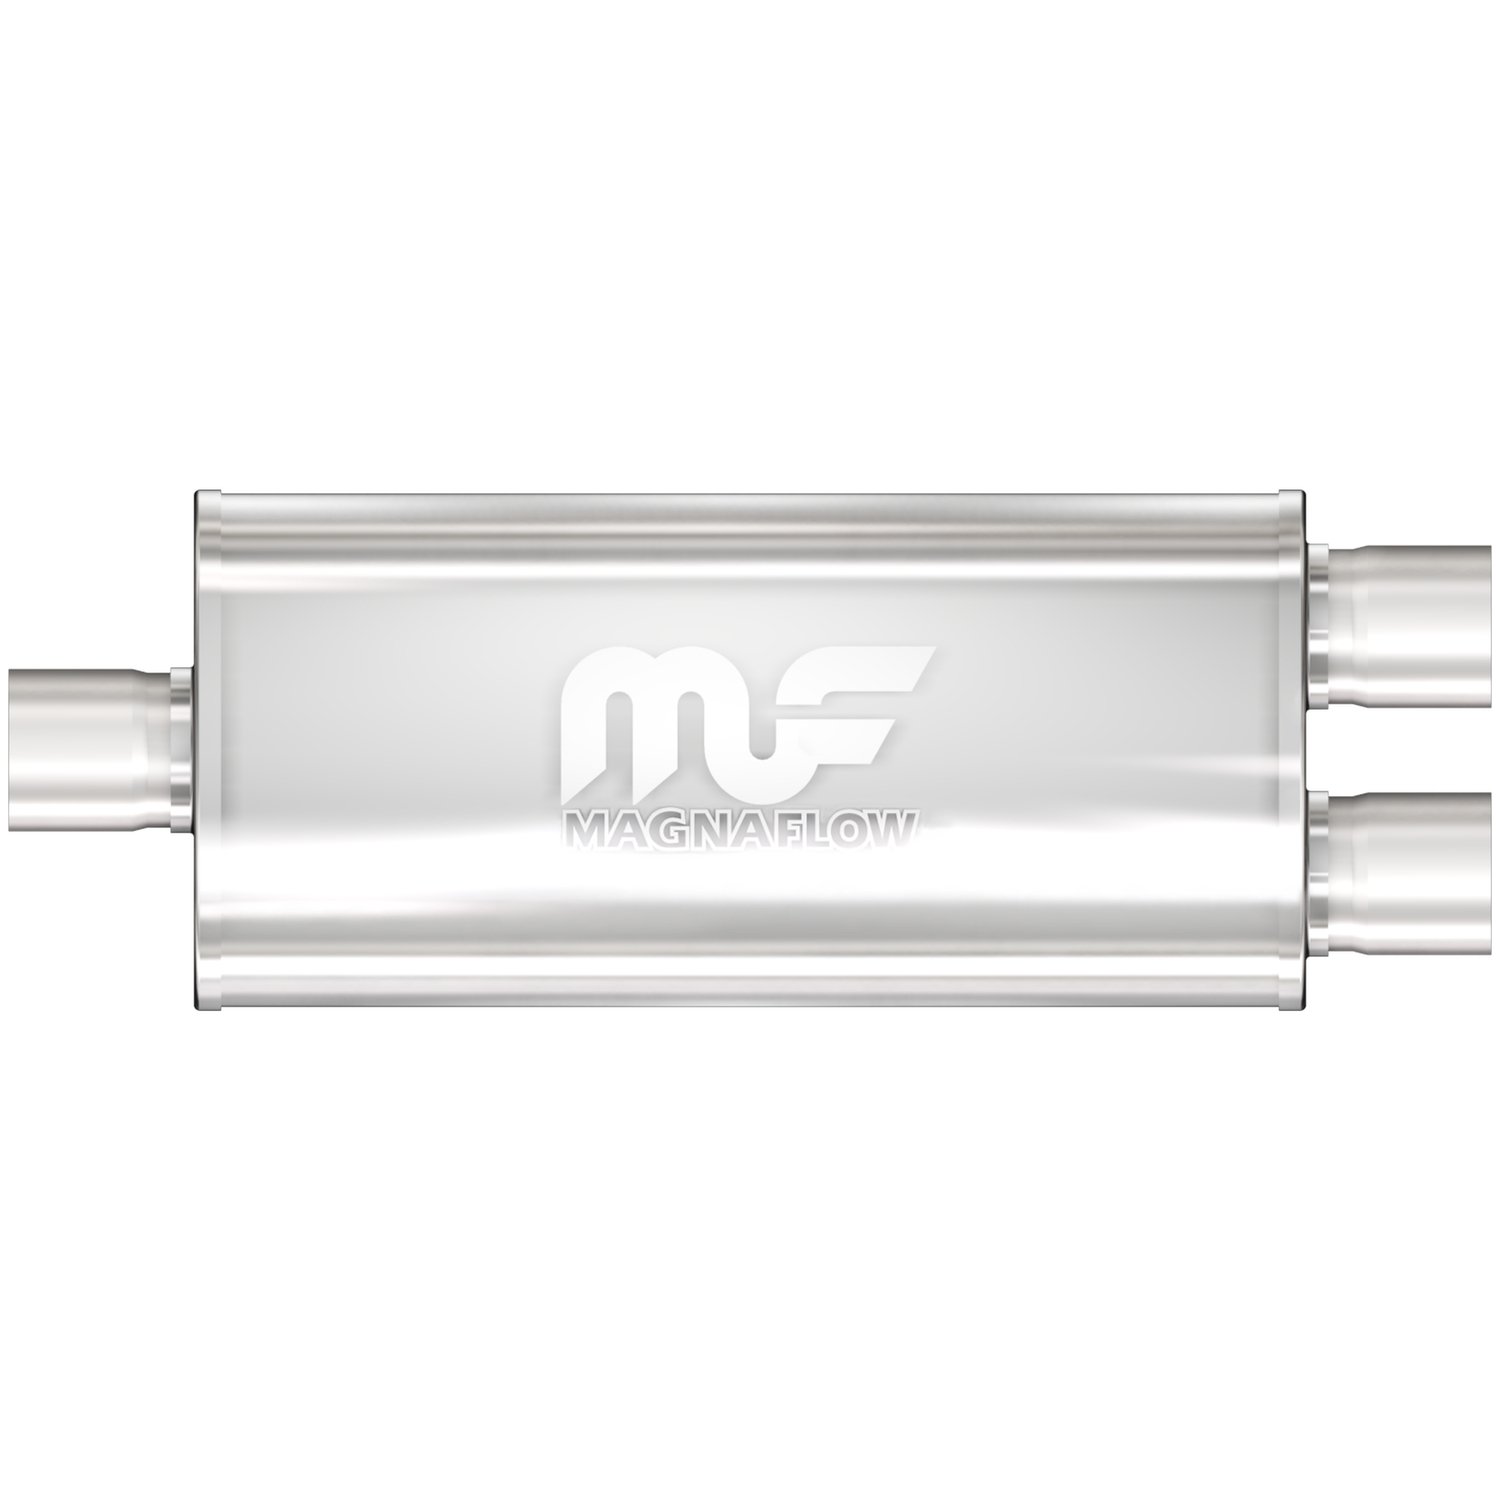 5" x 8" Oval Muffler Center In/Dual Out: 2.25"/2" Body Length: 14" Overall Length: 20" Core Size: 2.5" Satin Finish